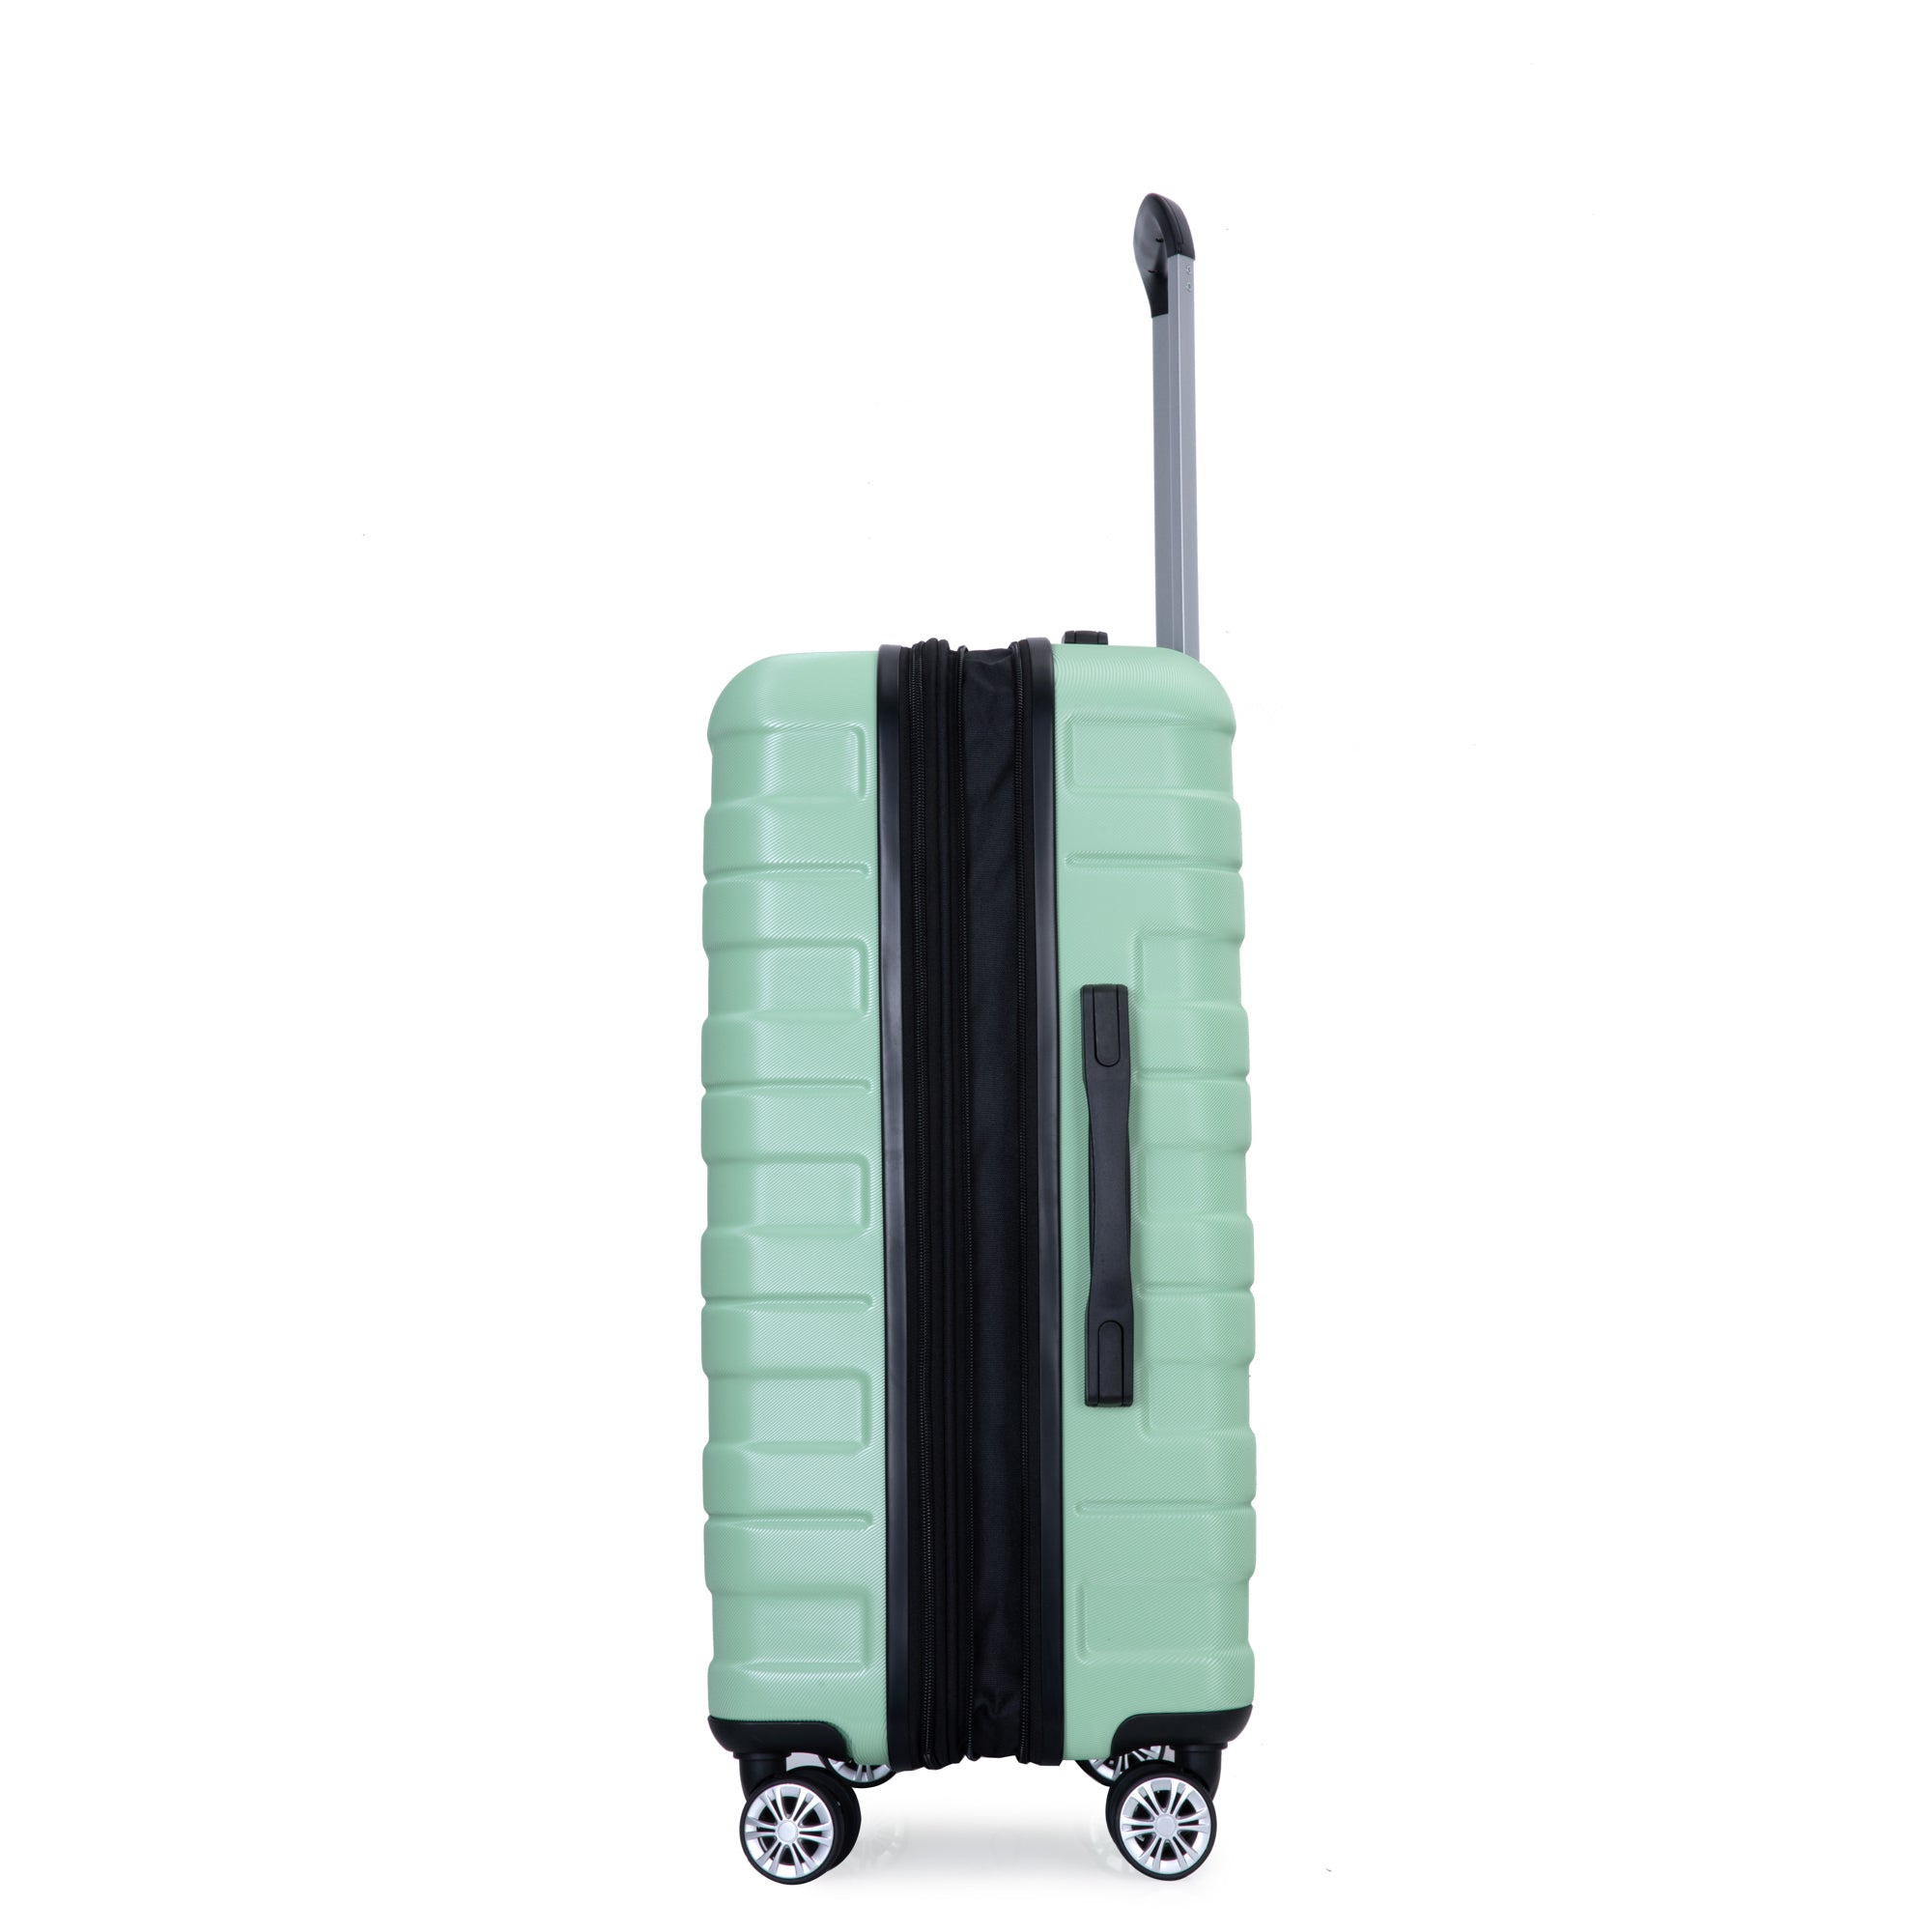 3 Piece Luggage Sets PC Lightweight & Durable light green-pc